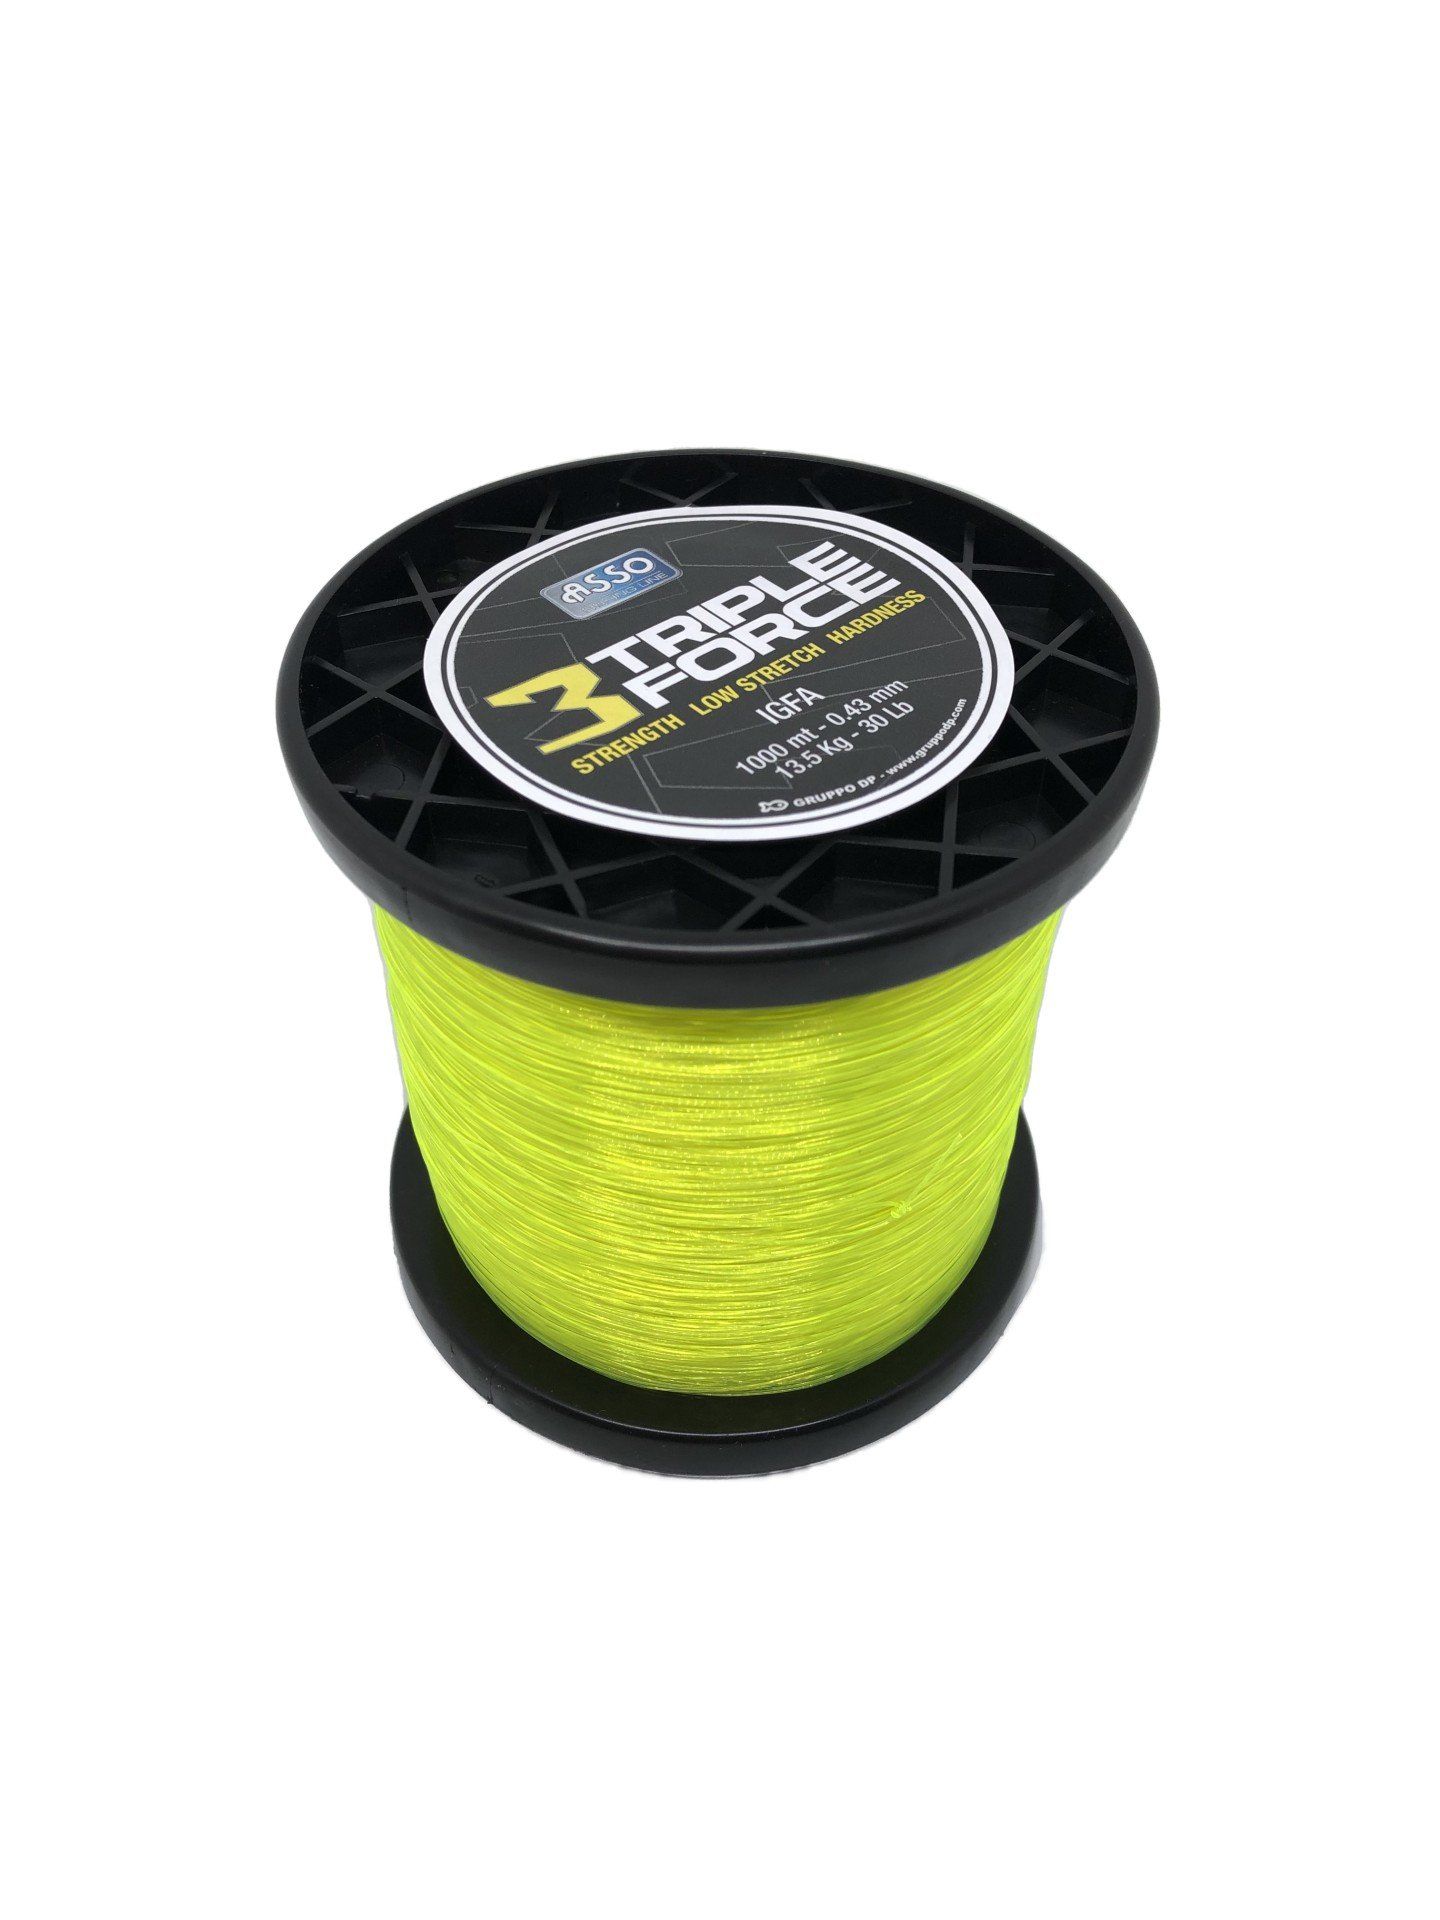 Asso Triple Force Strenght Igfa Class Low Stretch Hardness Line 1.000mt Yellow